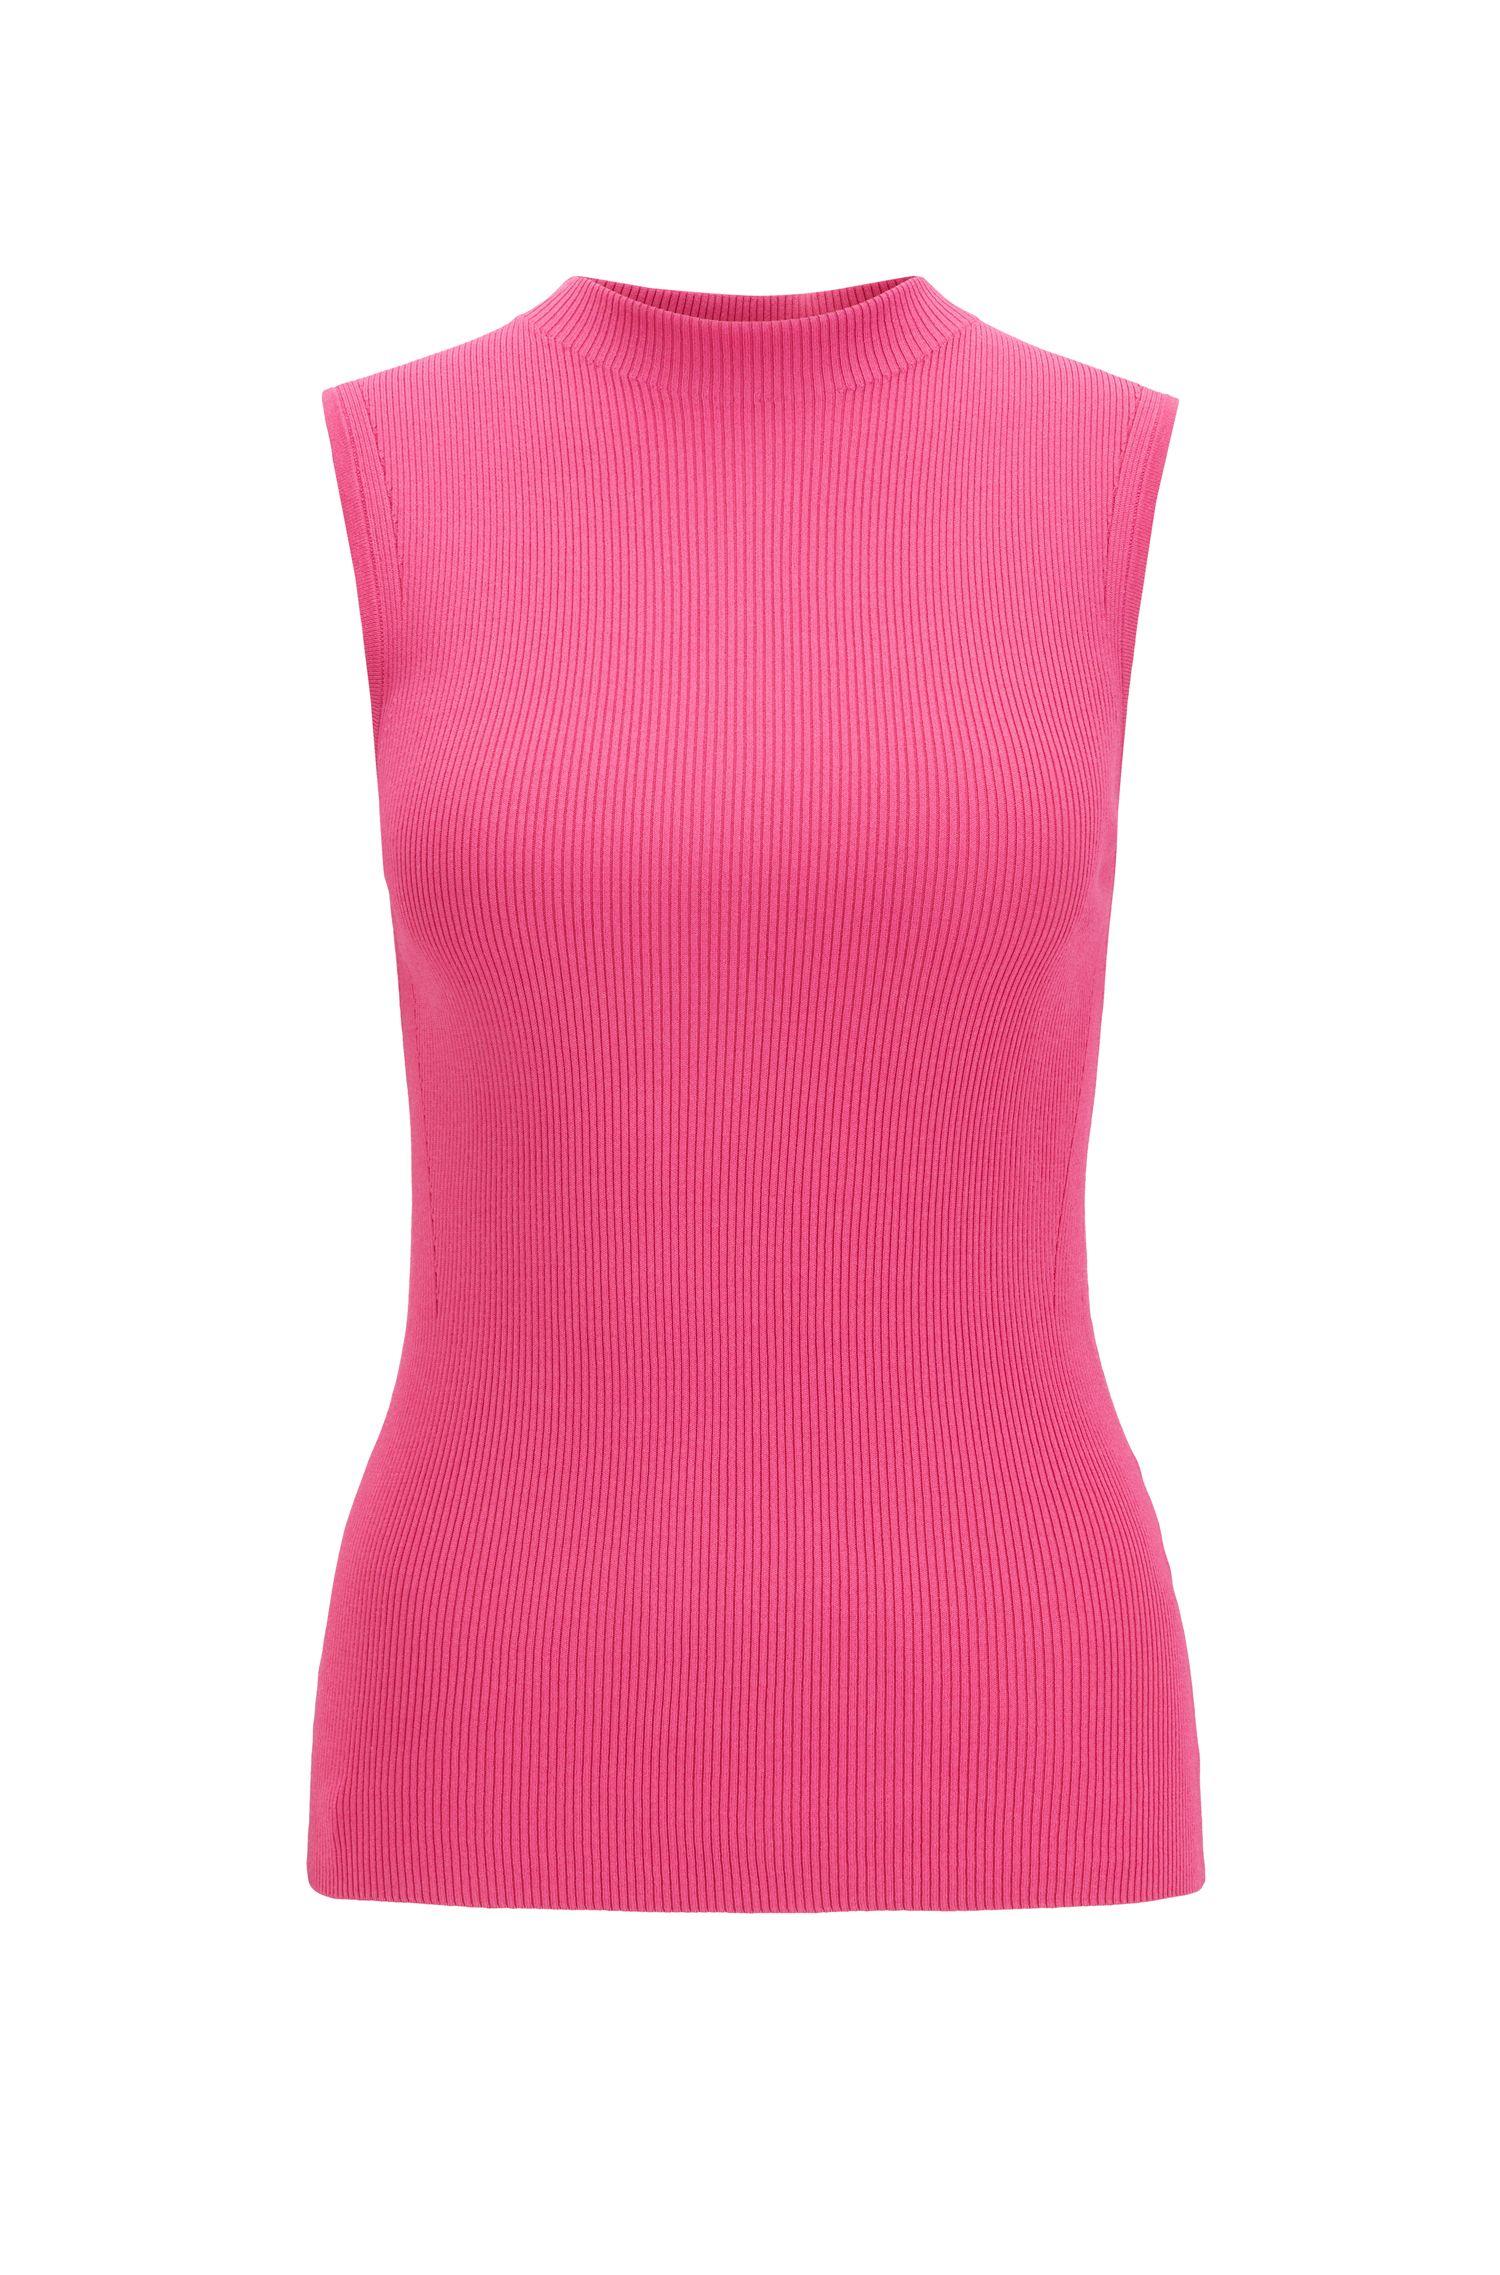 BOSS by Hugo Boss Slim Fit Sleeveless Top In A Ribbed Knit in Pink - Lyst